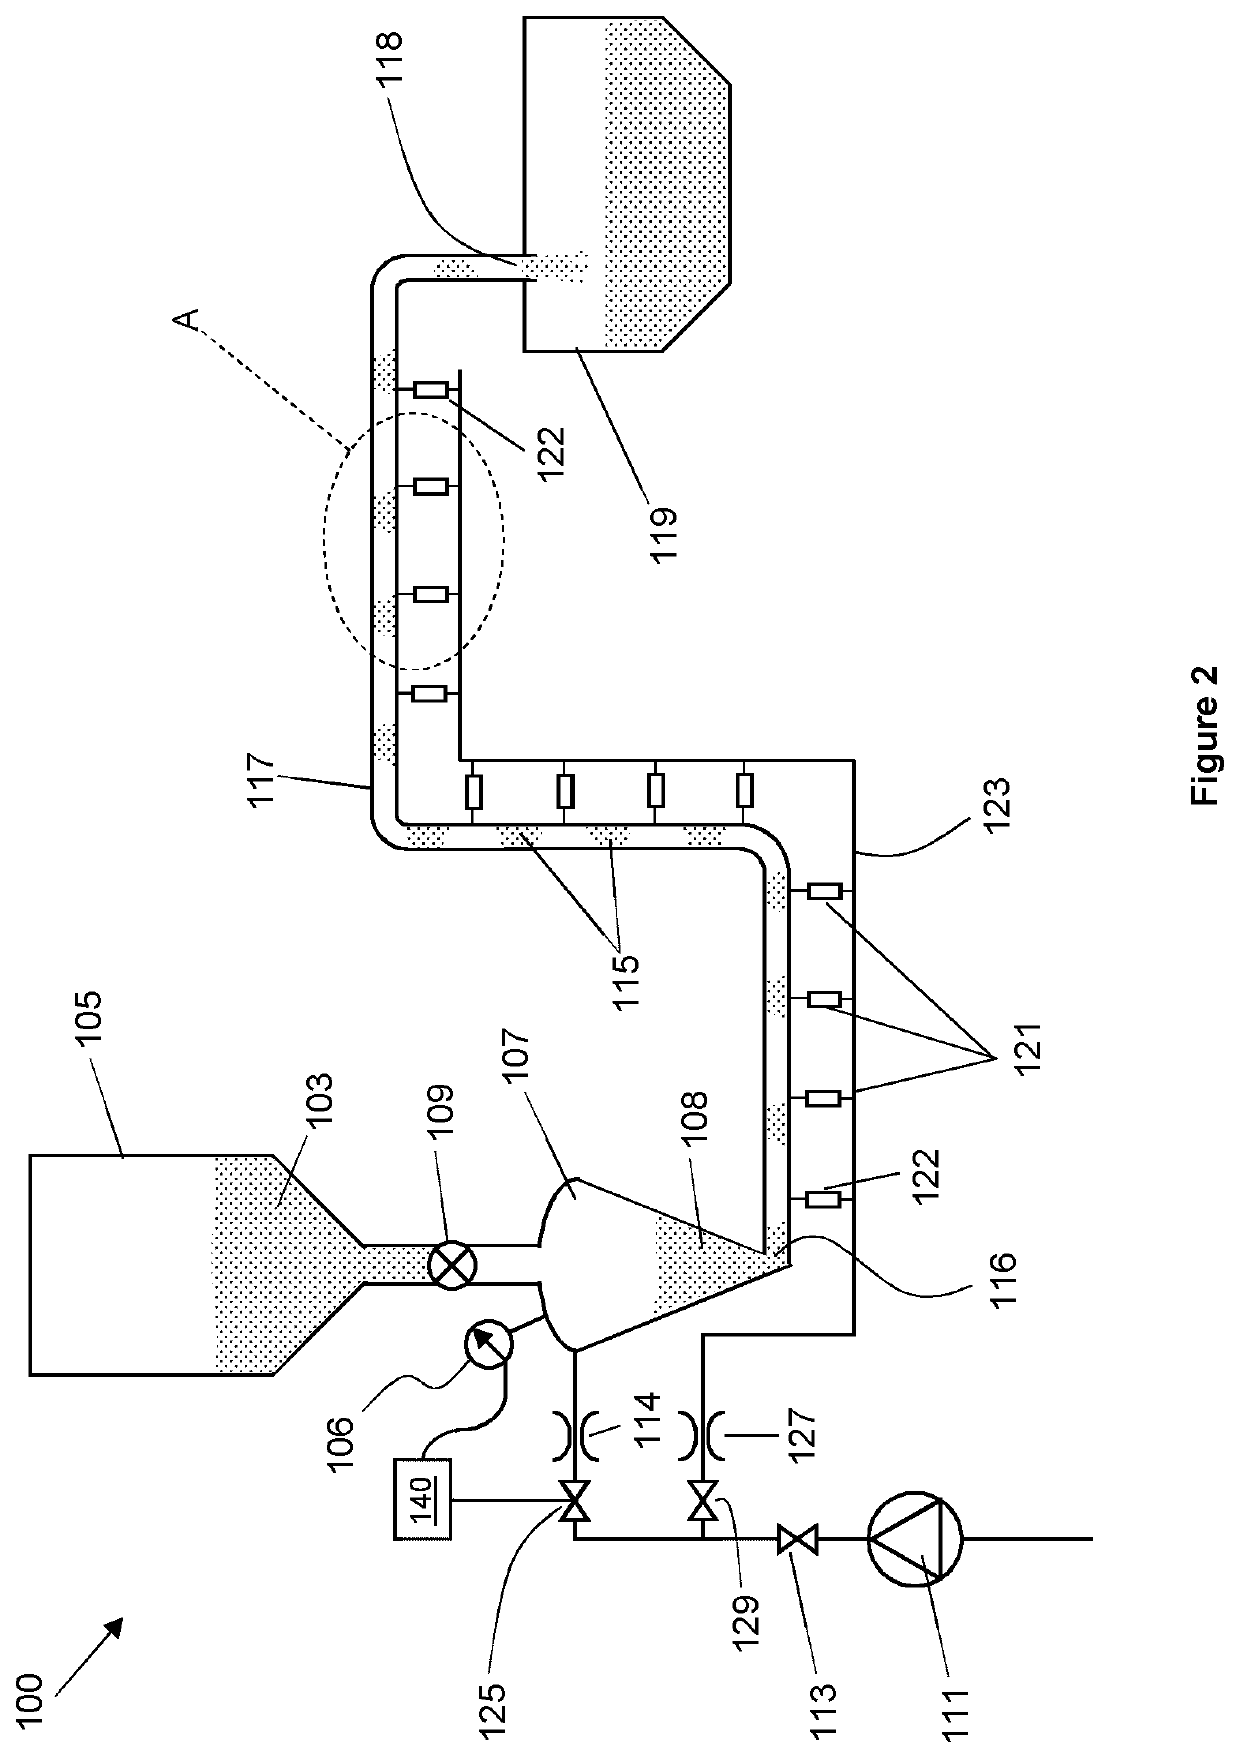 Material conveying apparatus with shut down valves